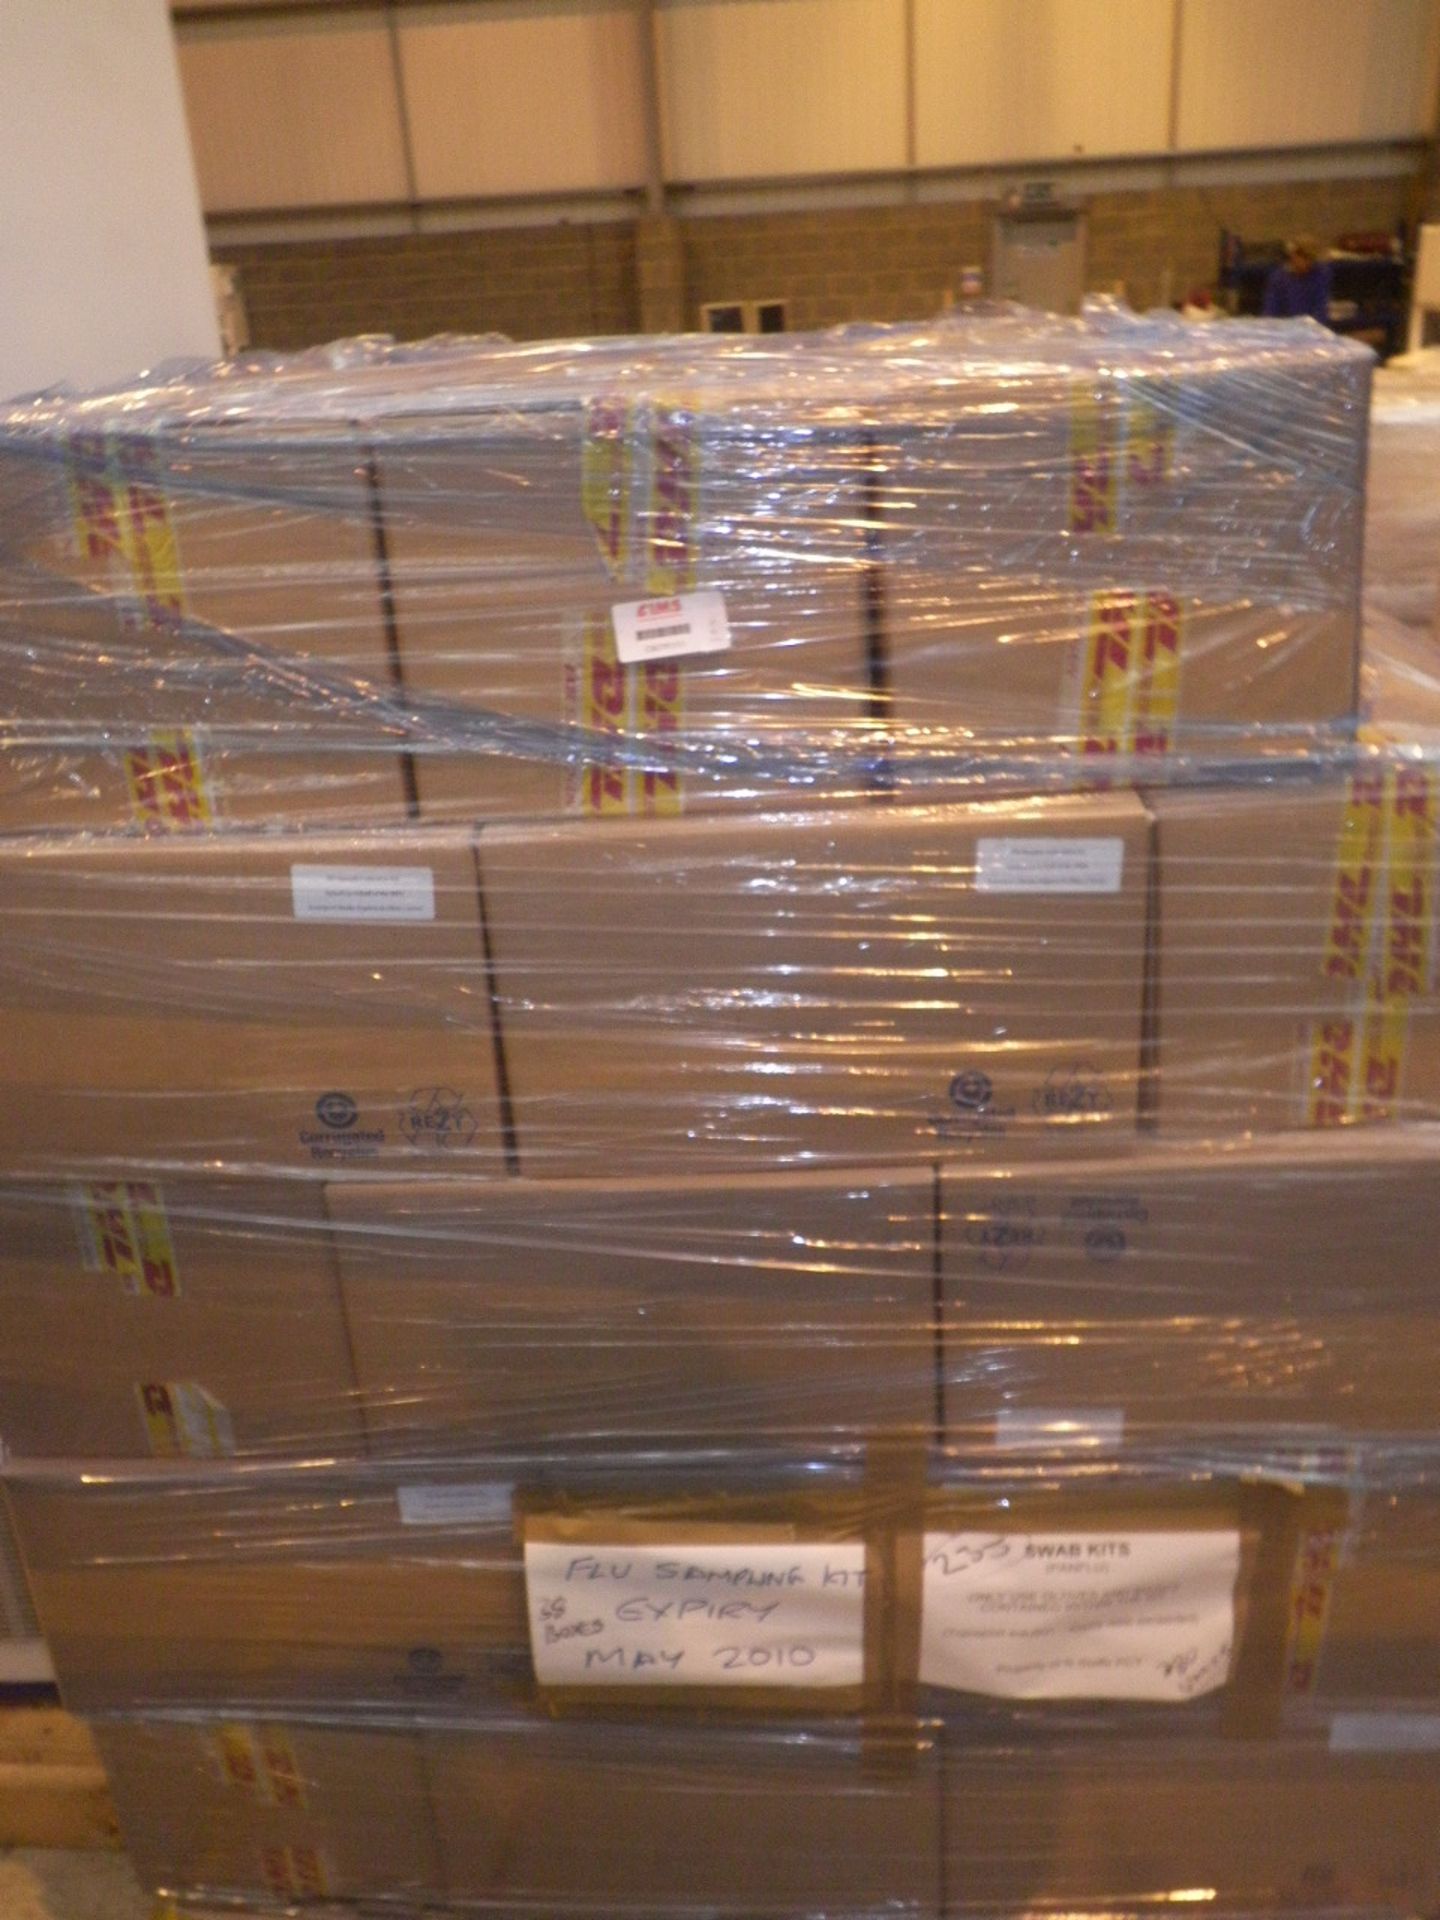 Pallet of Flu Sample Collection Kits